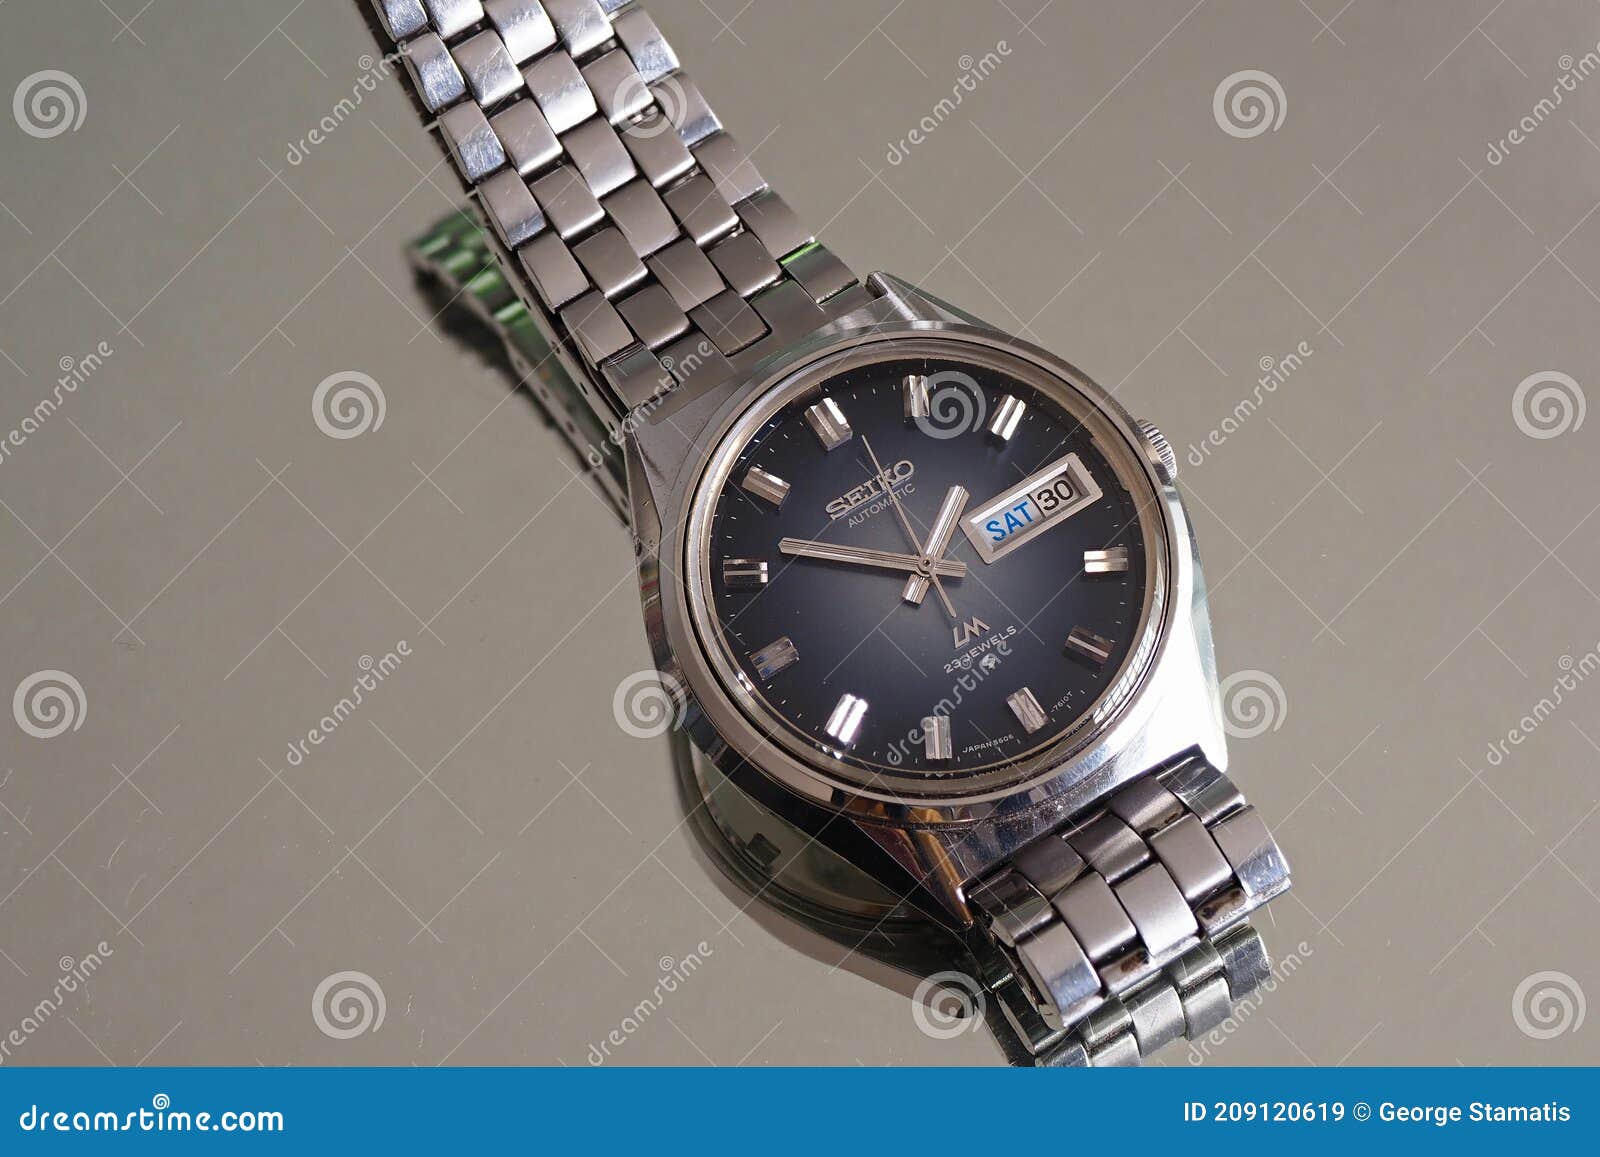 SEIKO AUTOMATIC LM 5606-7610T Editorial Stock Image - Image of time,  collection: 209120619